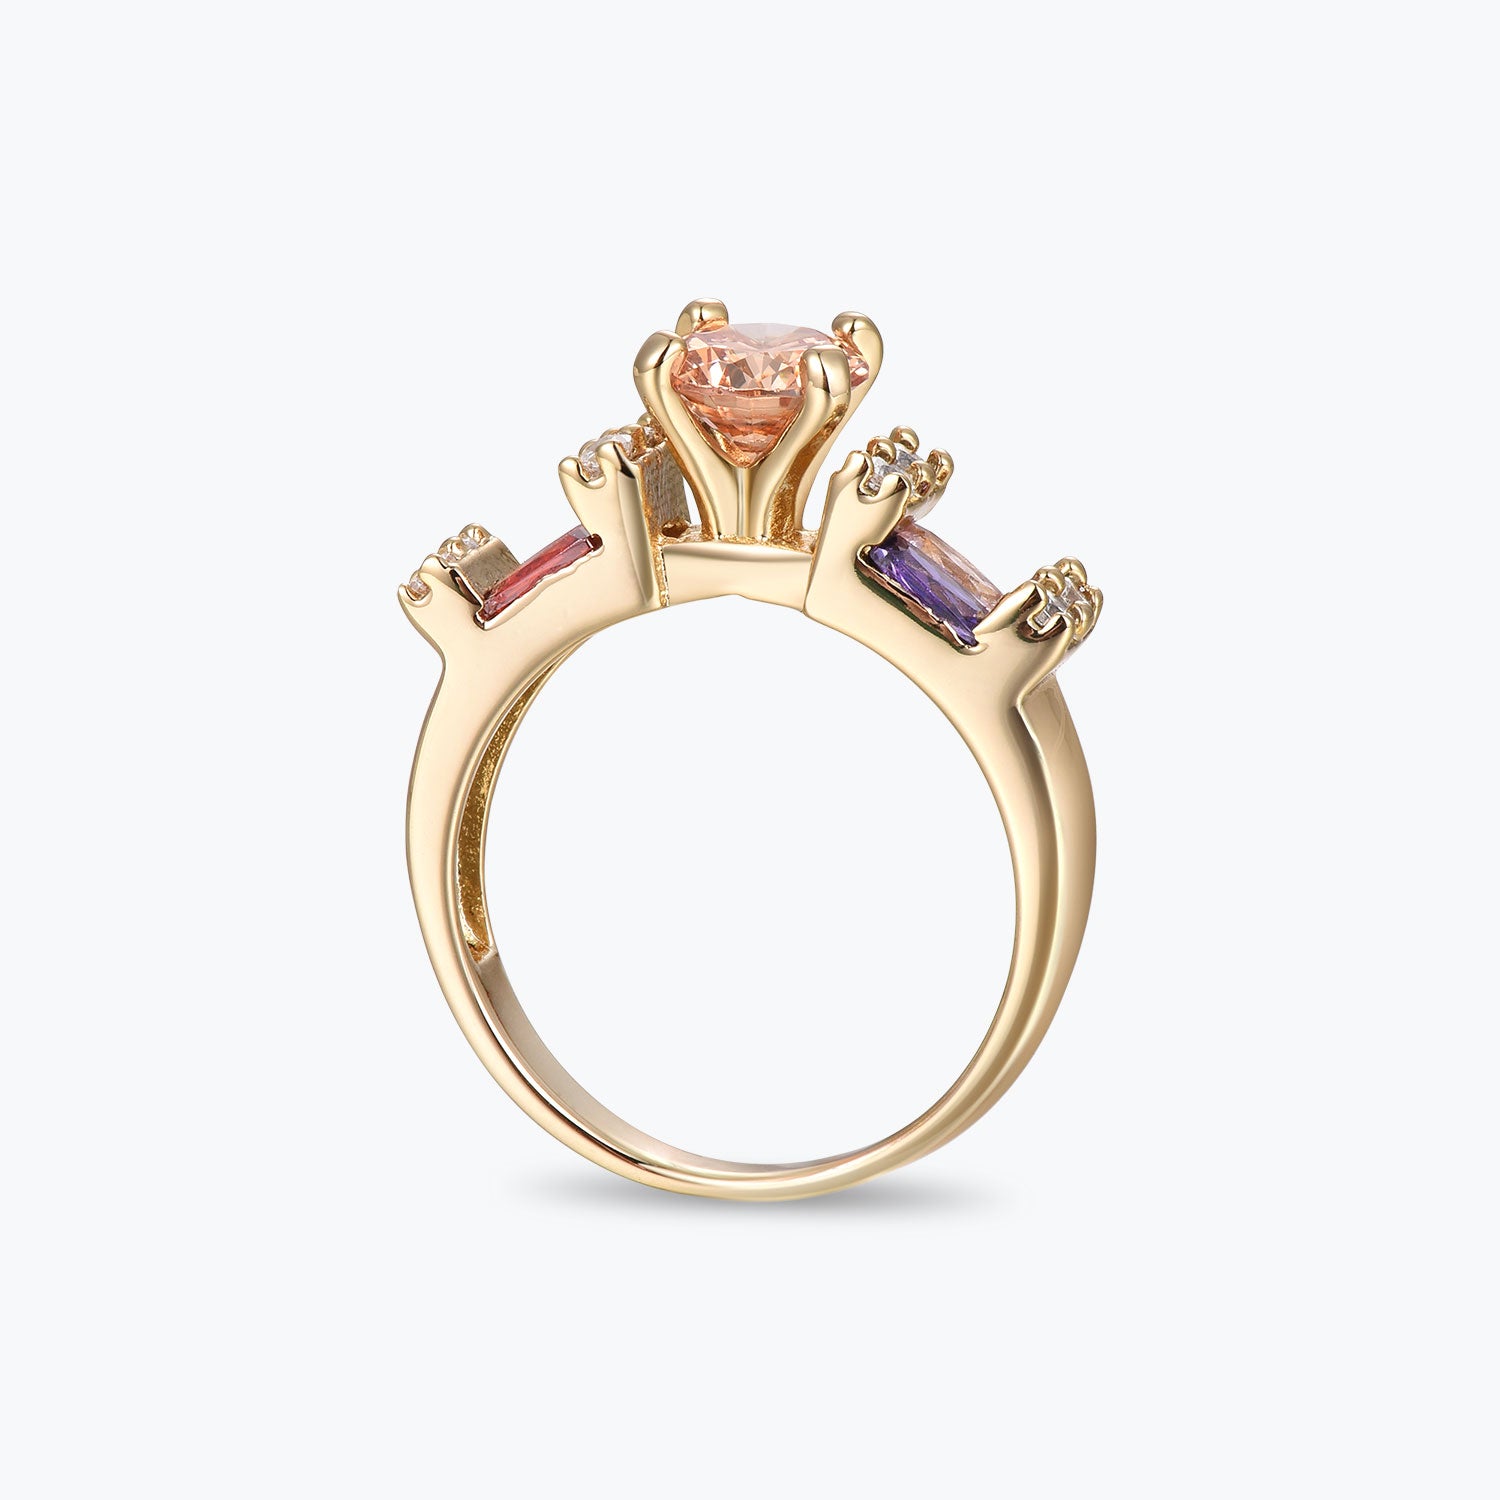 Dissoo® Gold Round Champagne Cocktail Statement Ring